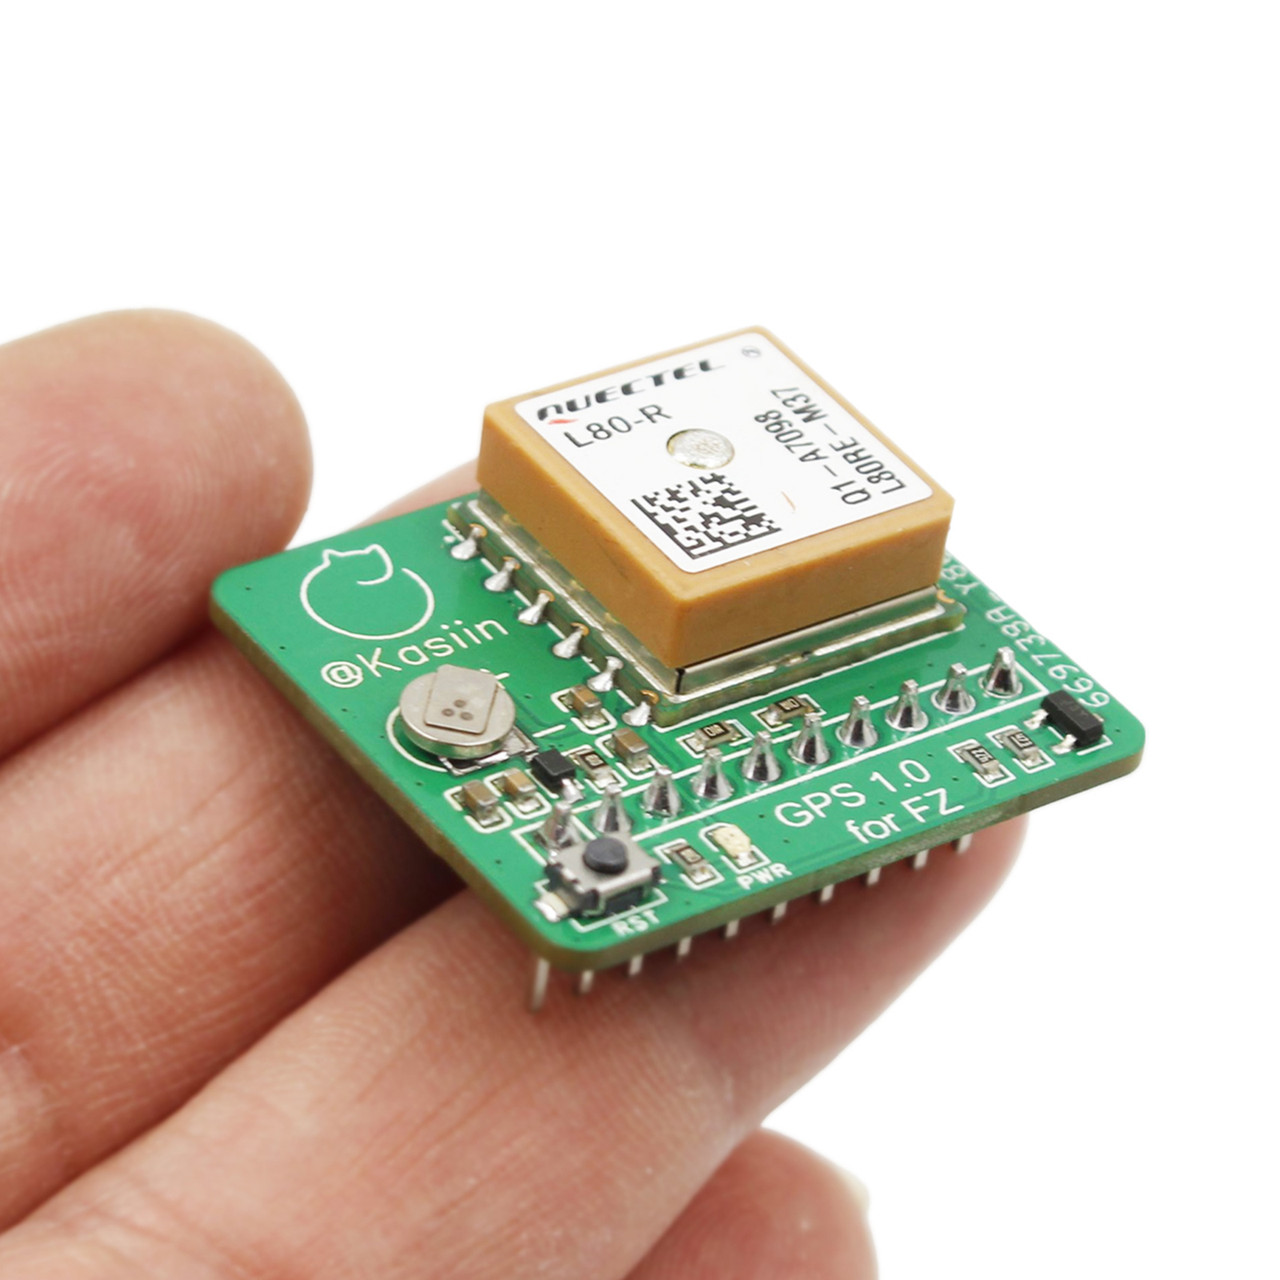 Latest GPS Module Uses Antenna Integrated Module Unleashed Firmware